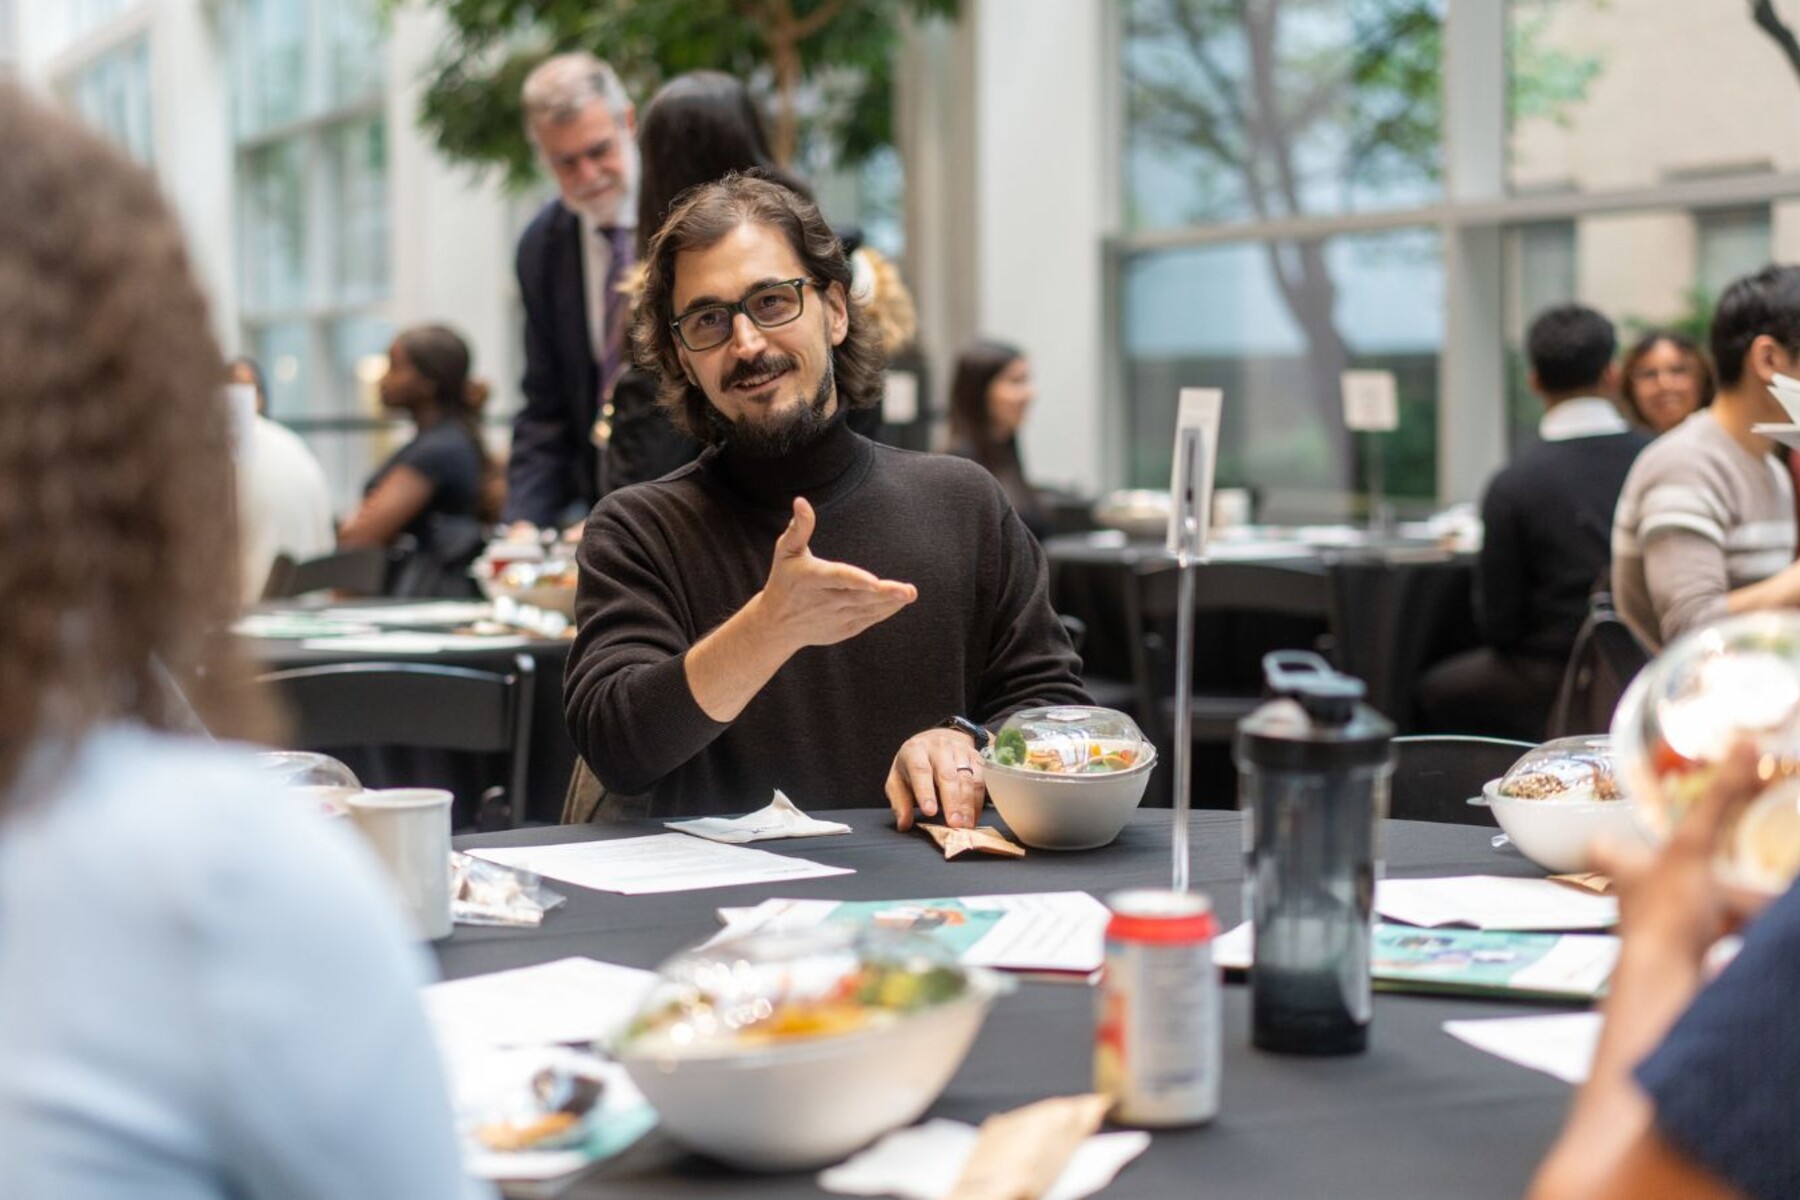 Artem Babaian gesturing while speaking to a student while sitting at a round table for lunch